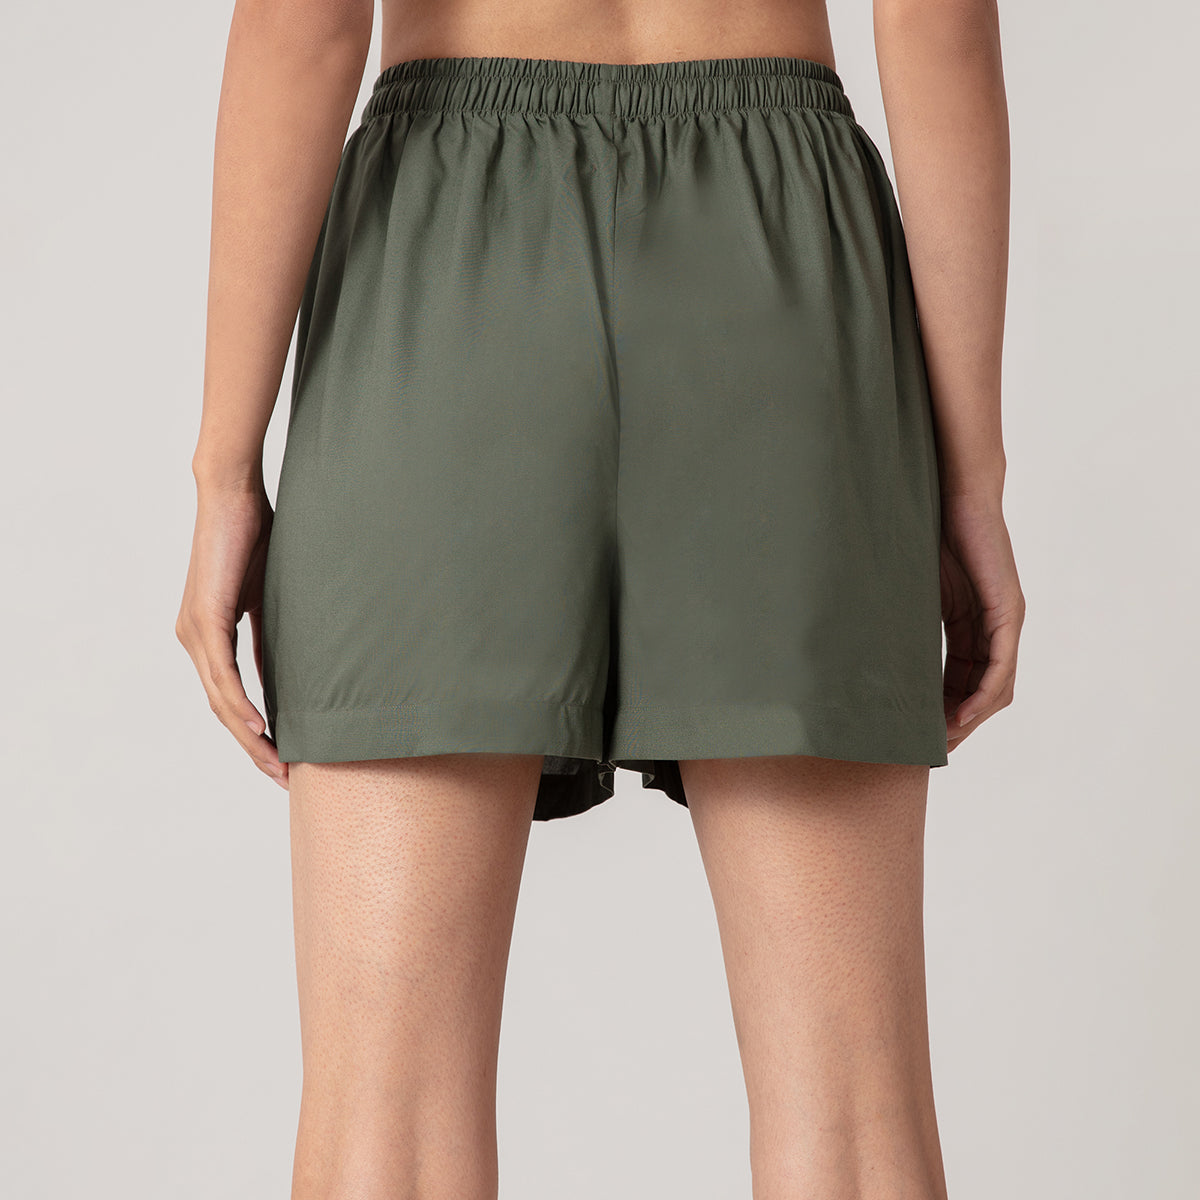 Comfy Vibes All Day Shorts  - Beetle Green NYS035